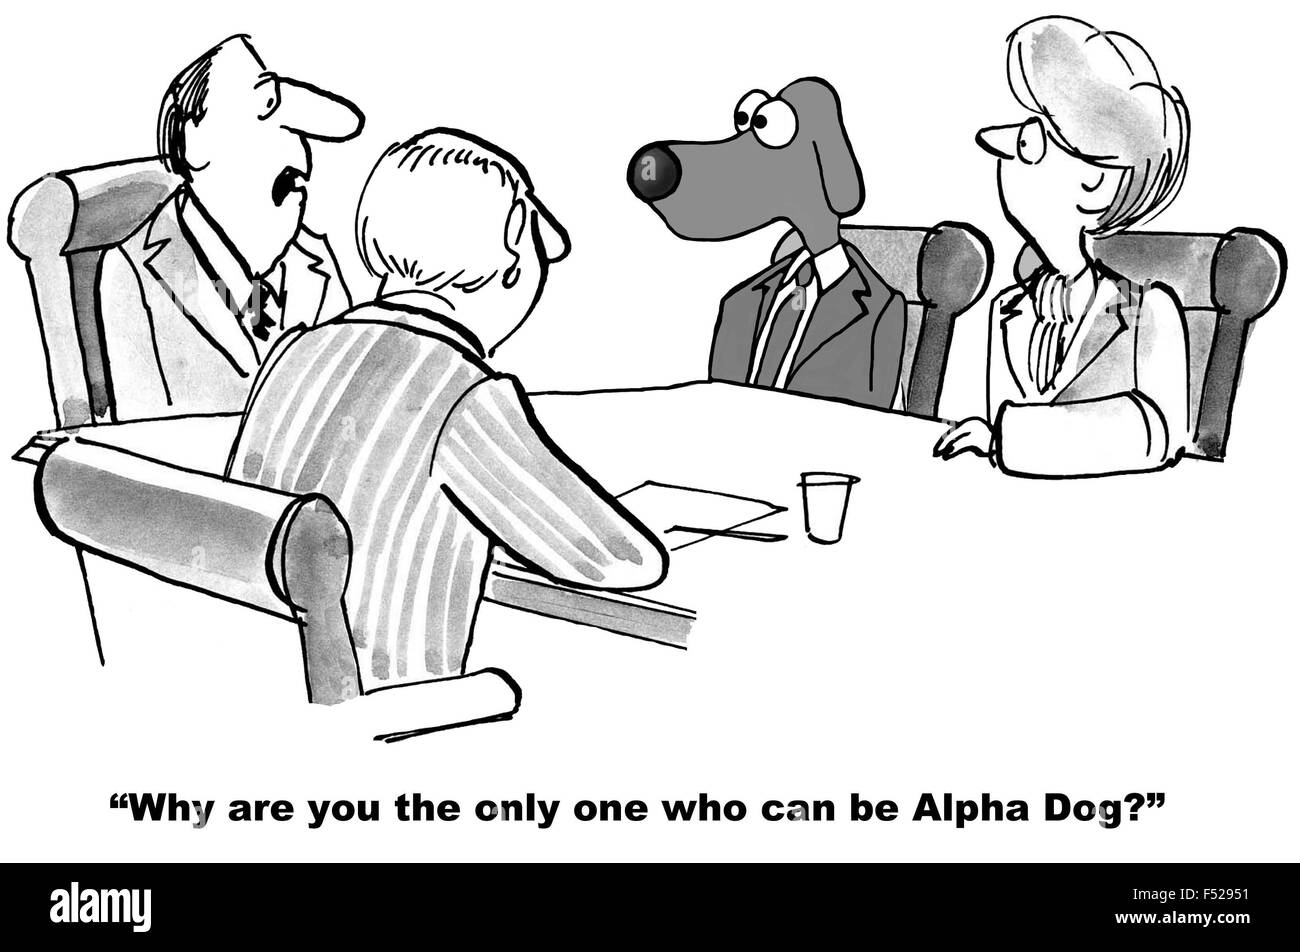 Business cartoon of a meeting, including a dog, 'Why are you the only one who can be Alpha Dog?'. Stock Photo